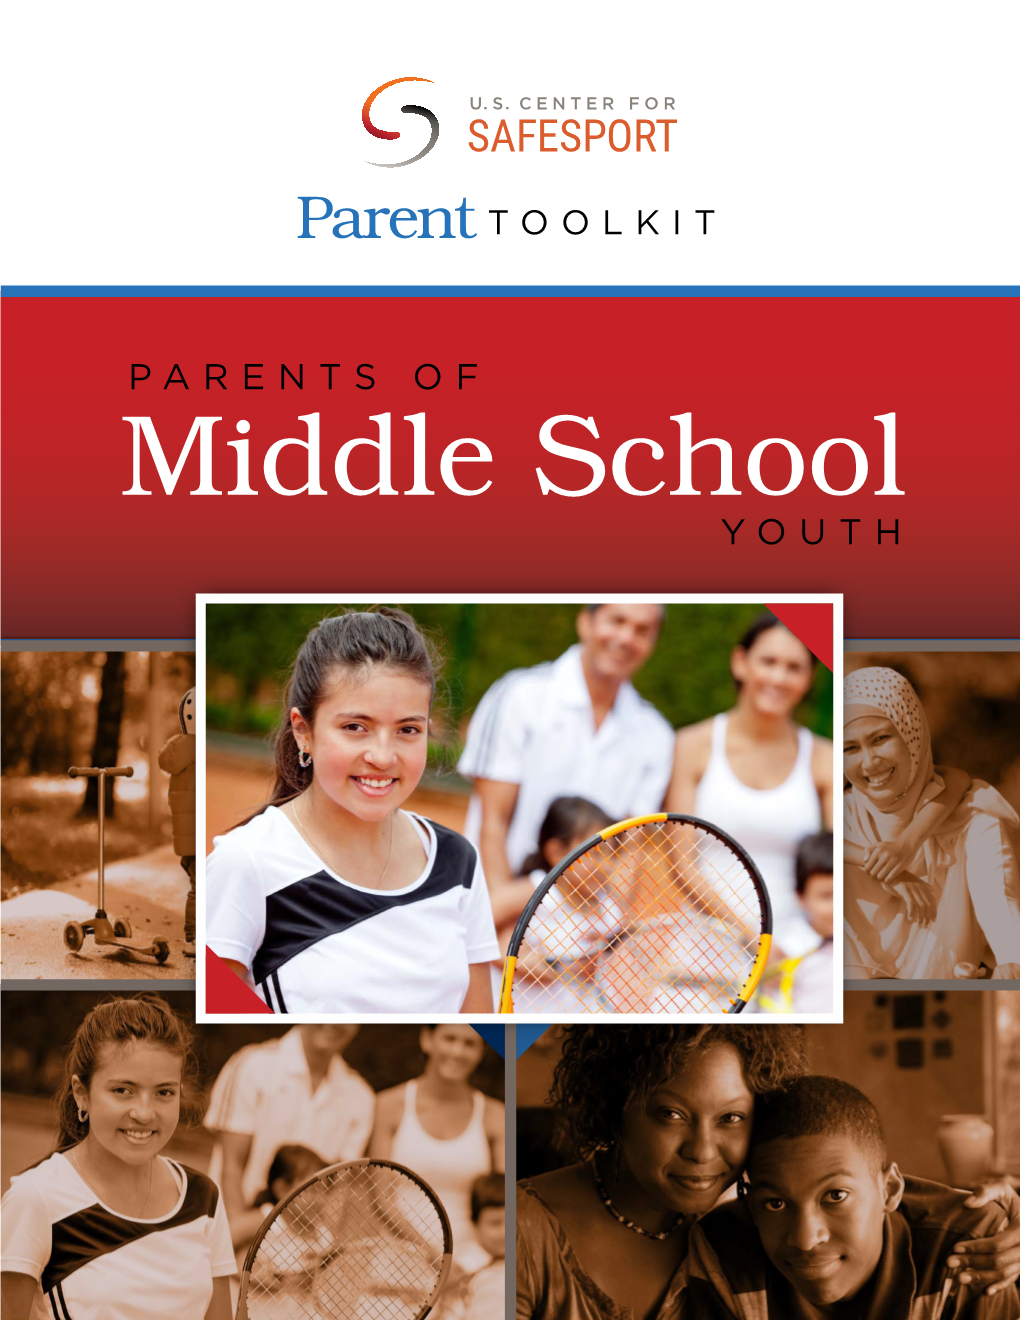 PARENTS of Middle School YOUTH Contents